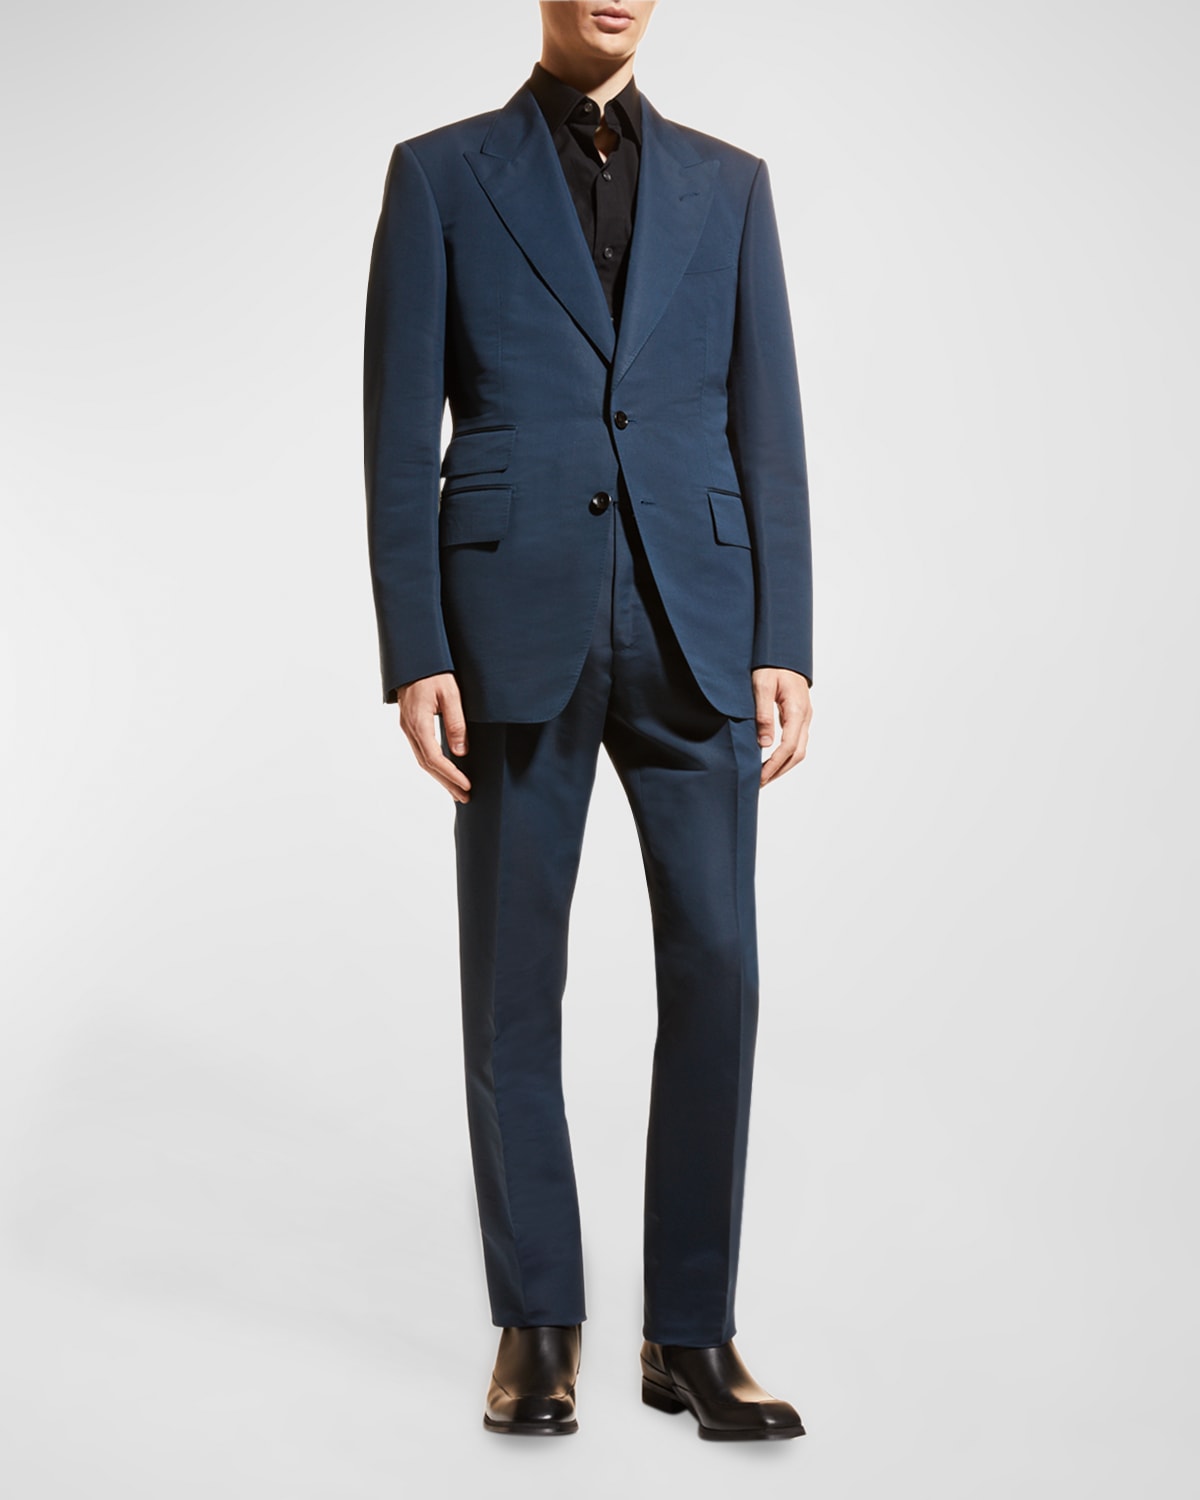 Tom Ford Navy Suit | Neiman Marcus